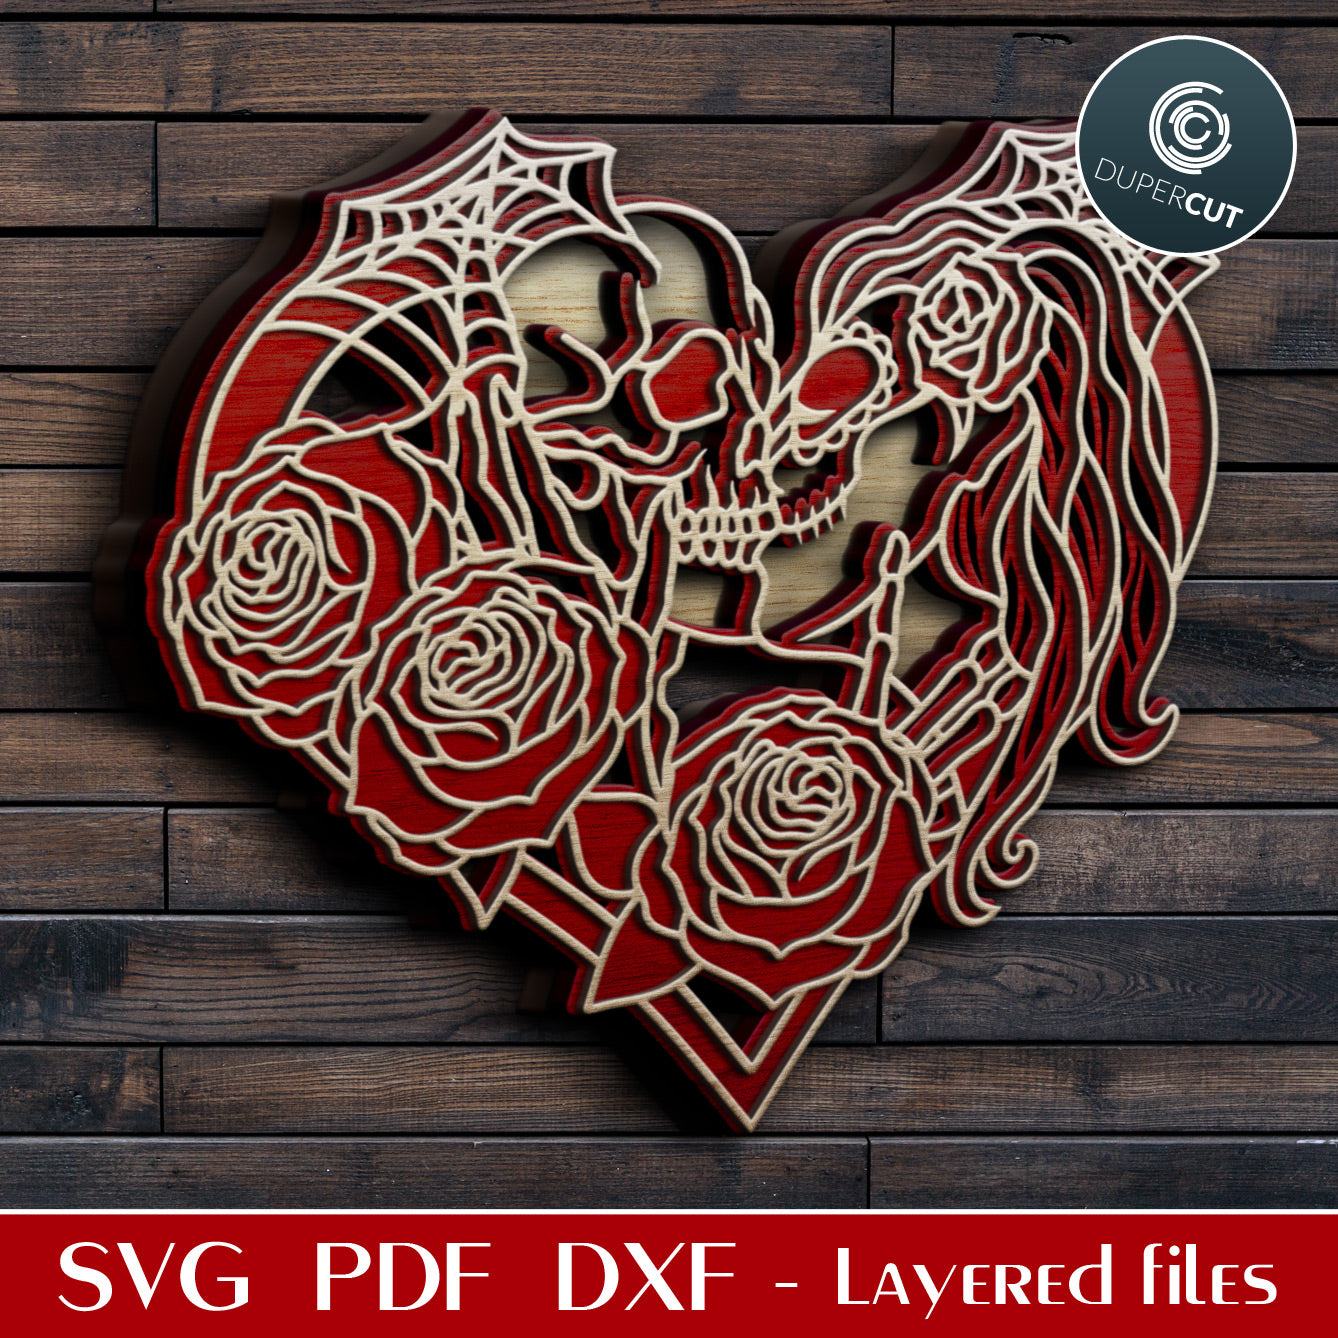 Skull kiss with roses - steampunk design - SVG PDF DXF layered cutting files for Glowforge, Cricut, Silhouette cameo, CNC plasma machines